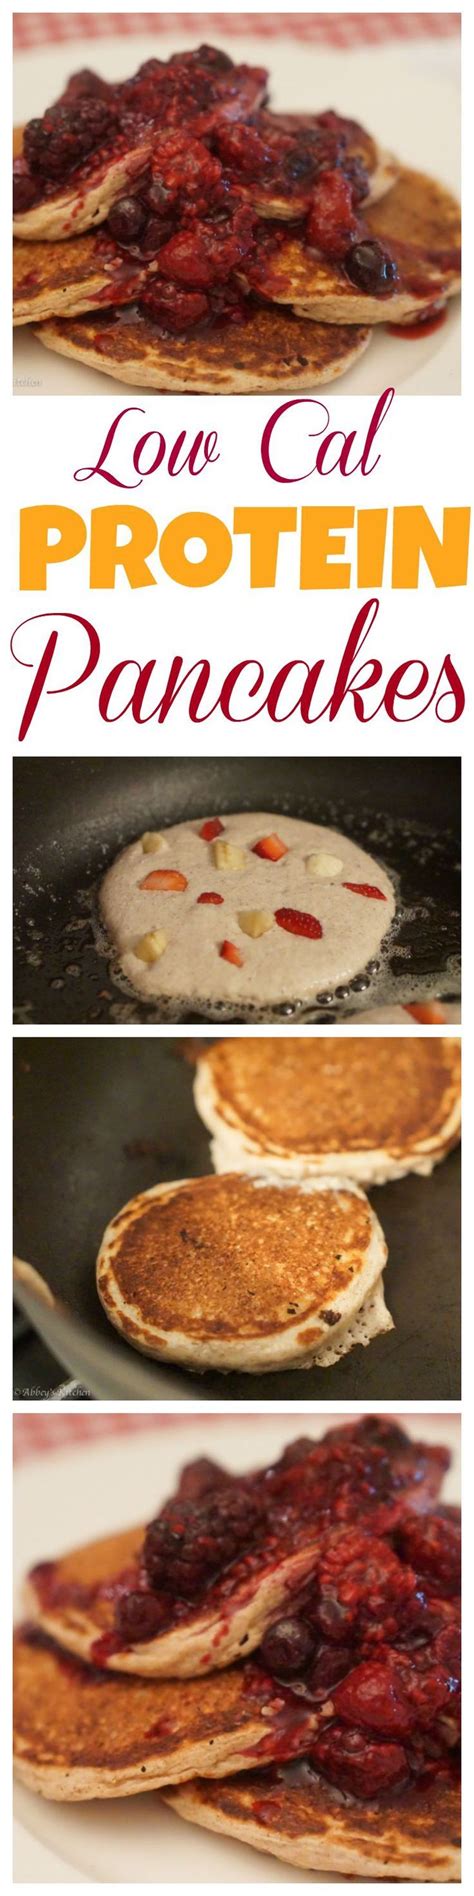 Super Healthy Low Calorie High Fibre Protein Pancakes Made With Cottage